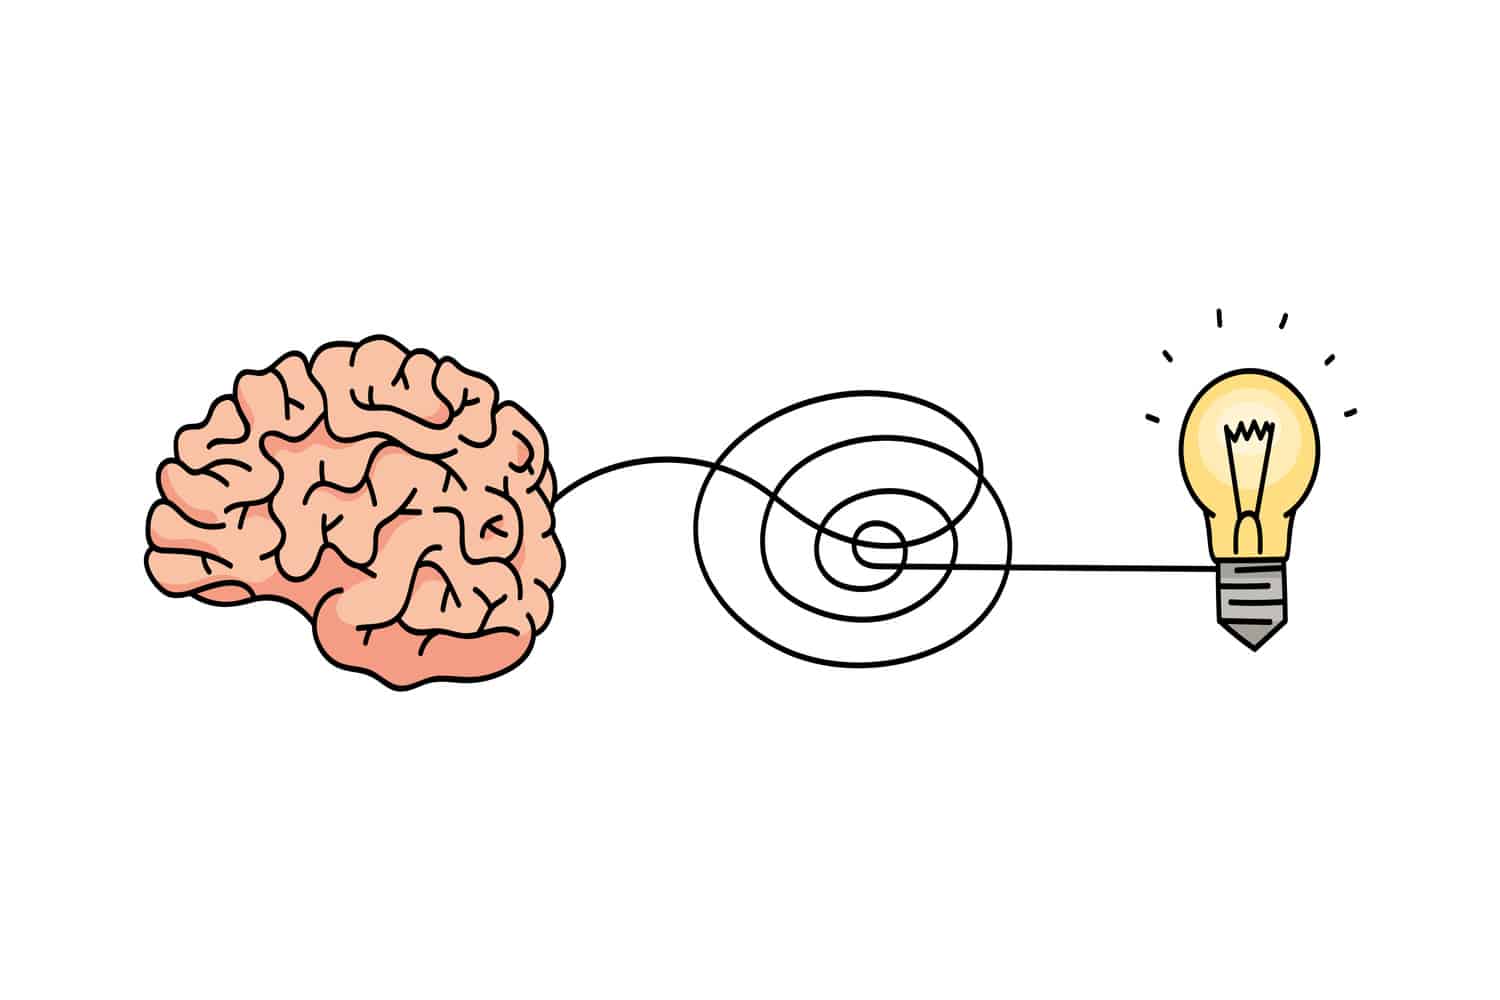 Creative thinking - brain icon connected to new idea lightbulb symbol with freehand spiral line